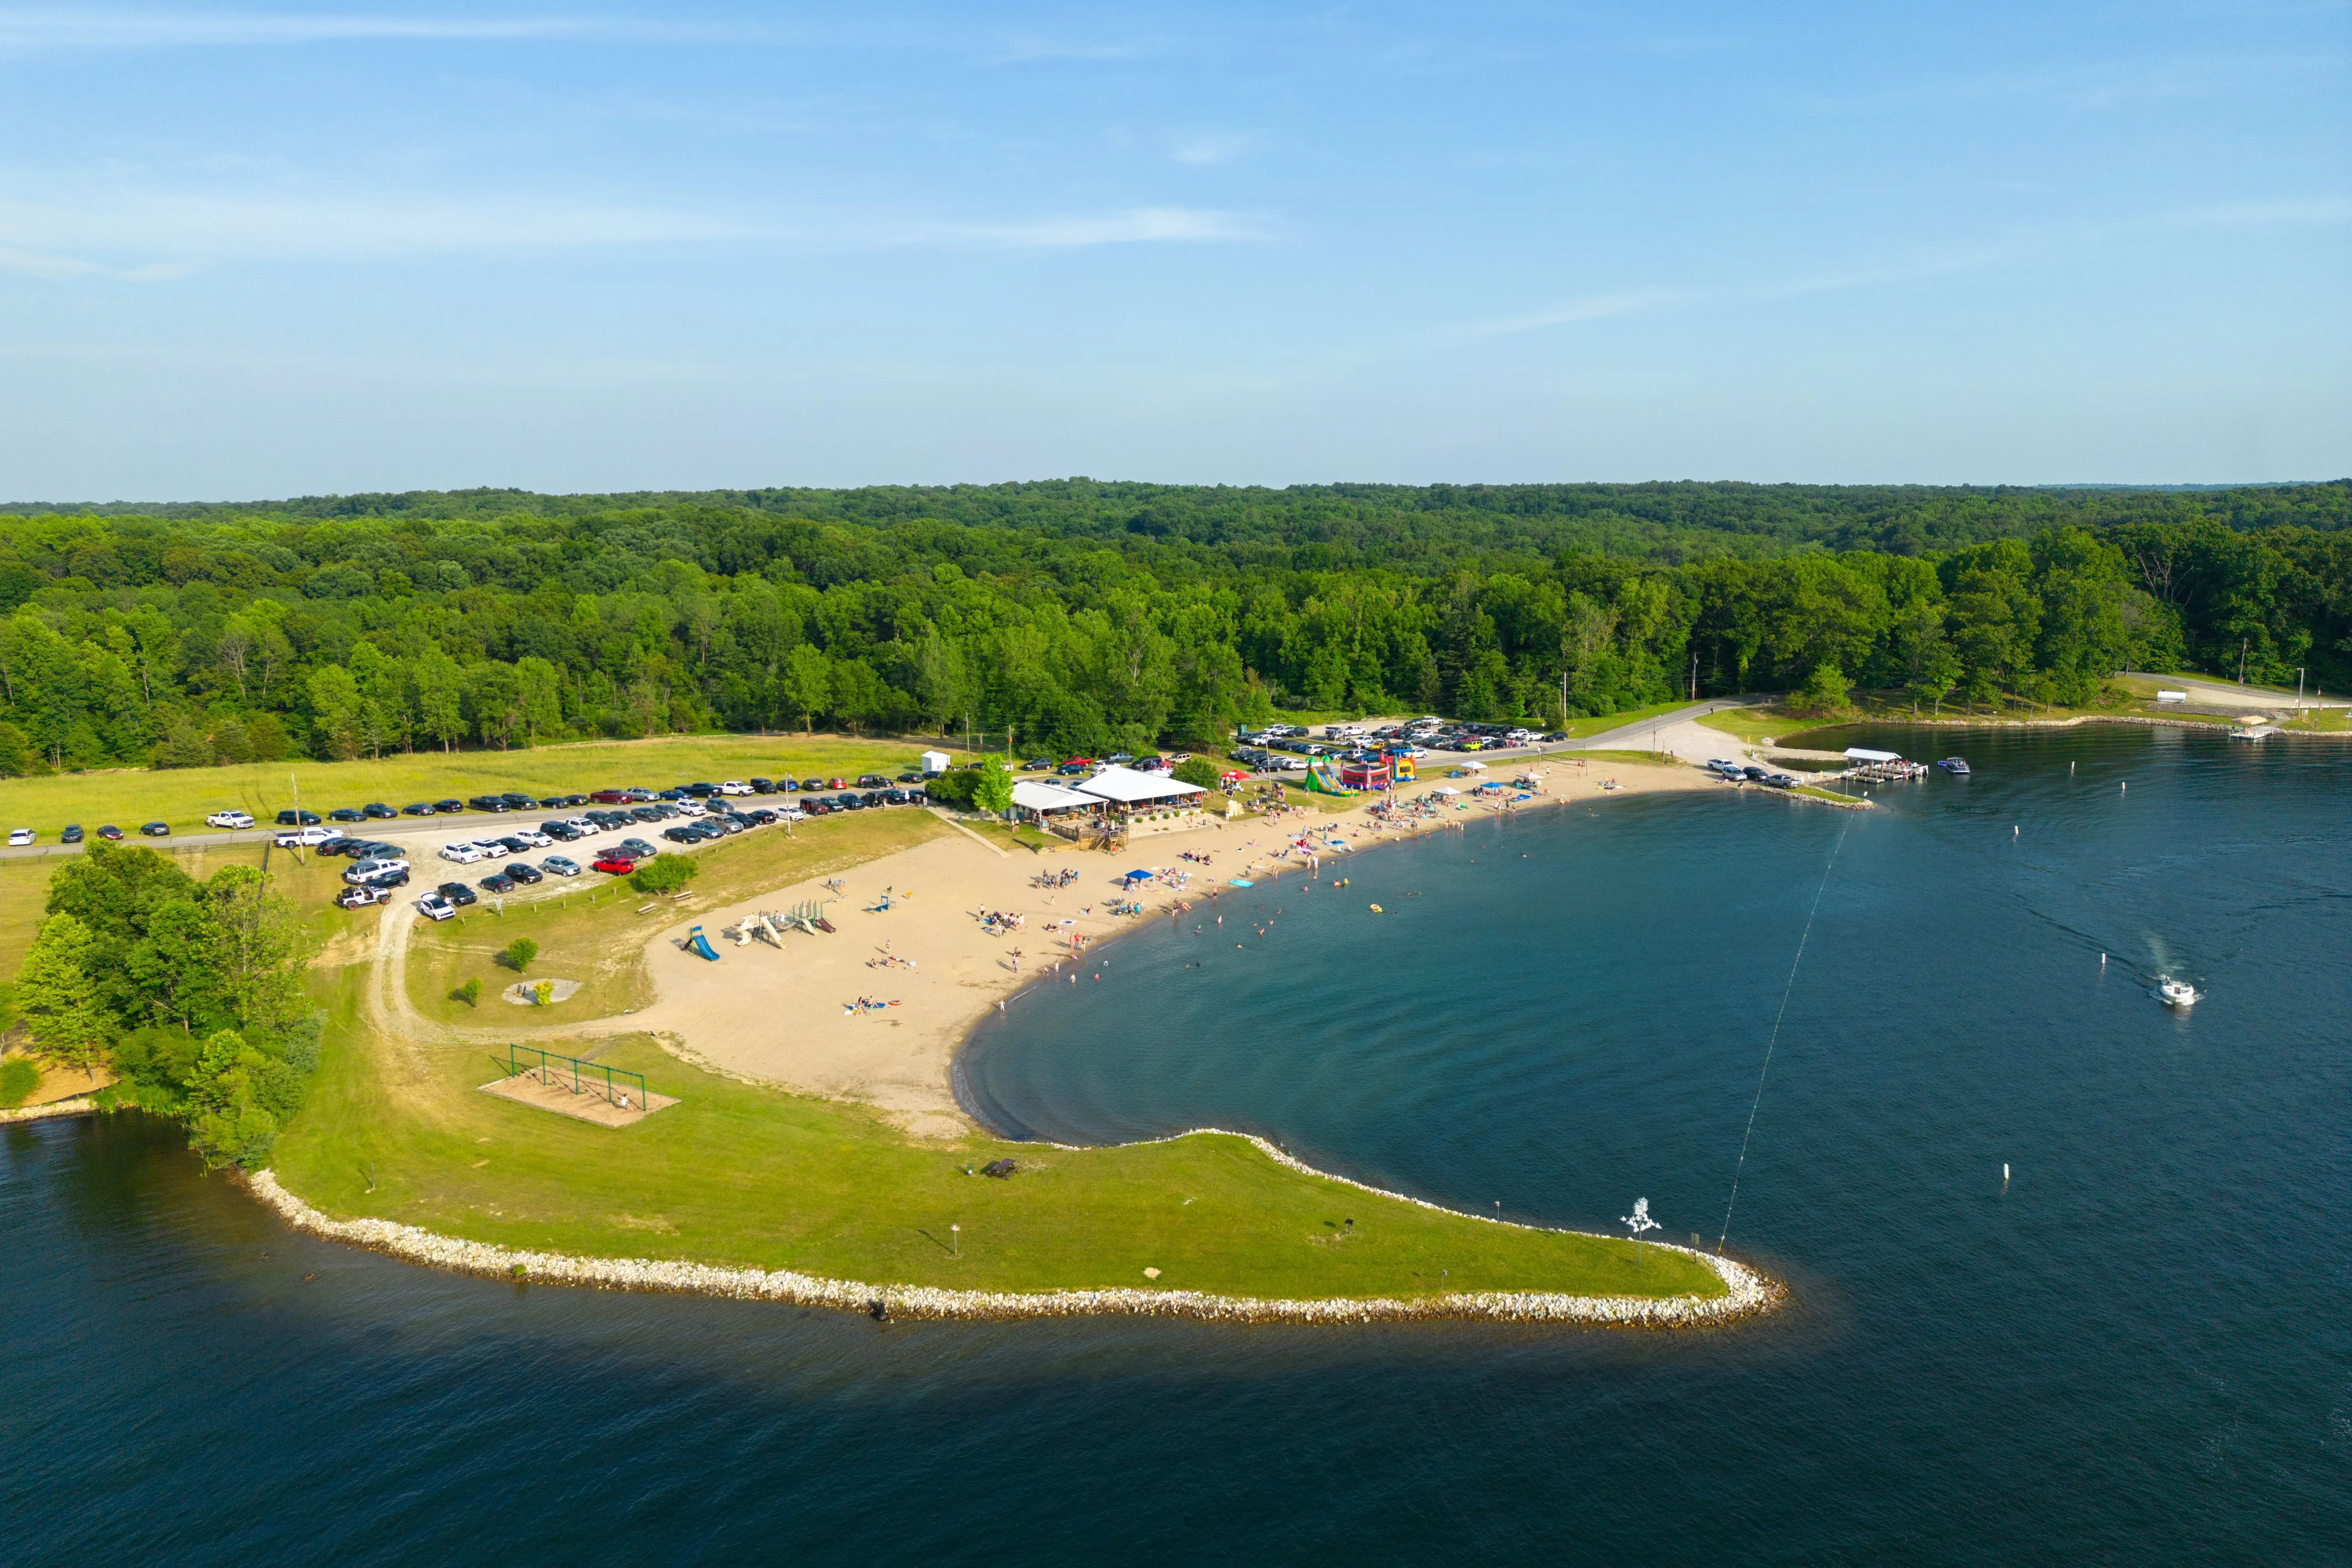 Aerial view of a beach park with a parking lot, trees, a sandy shoreline, and people enjoying water activities on a sunny day.